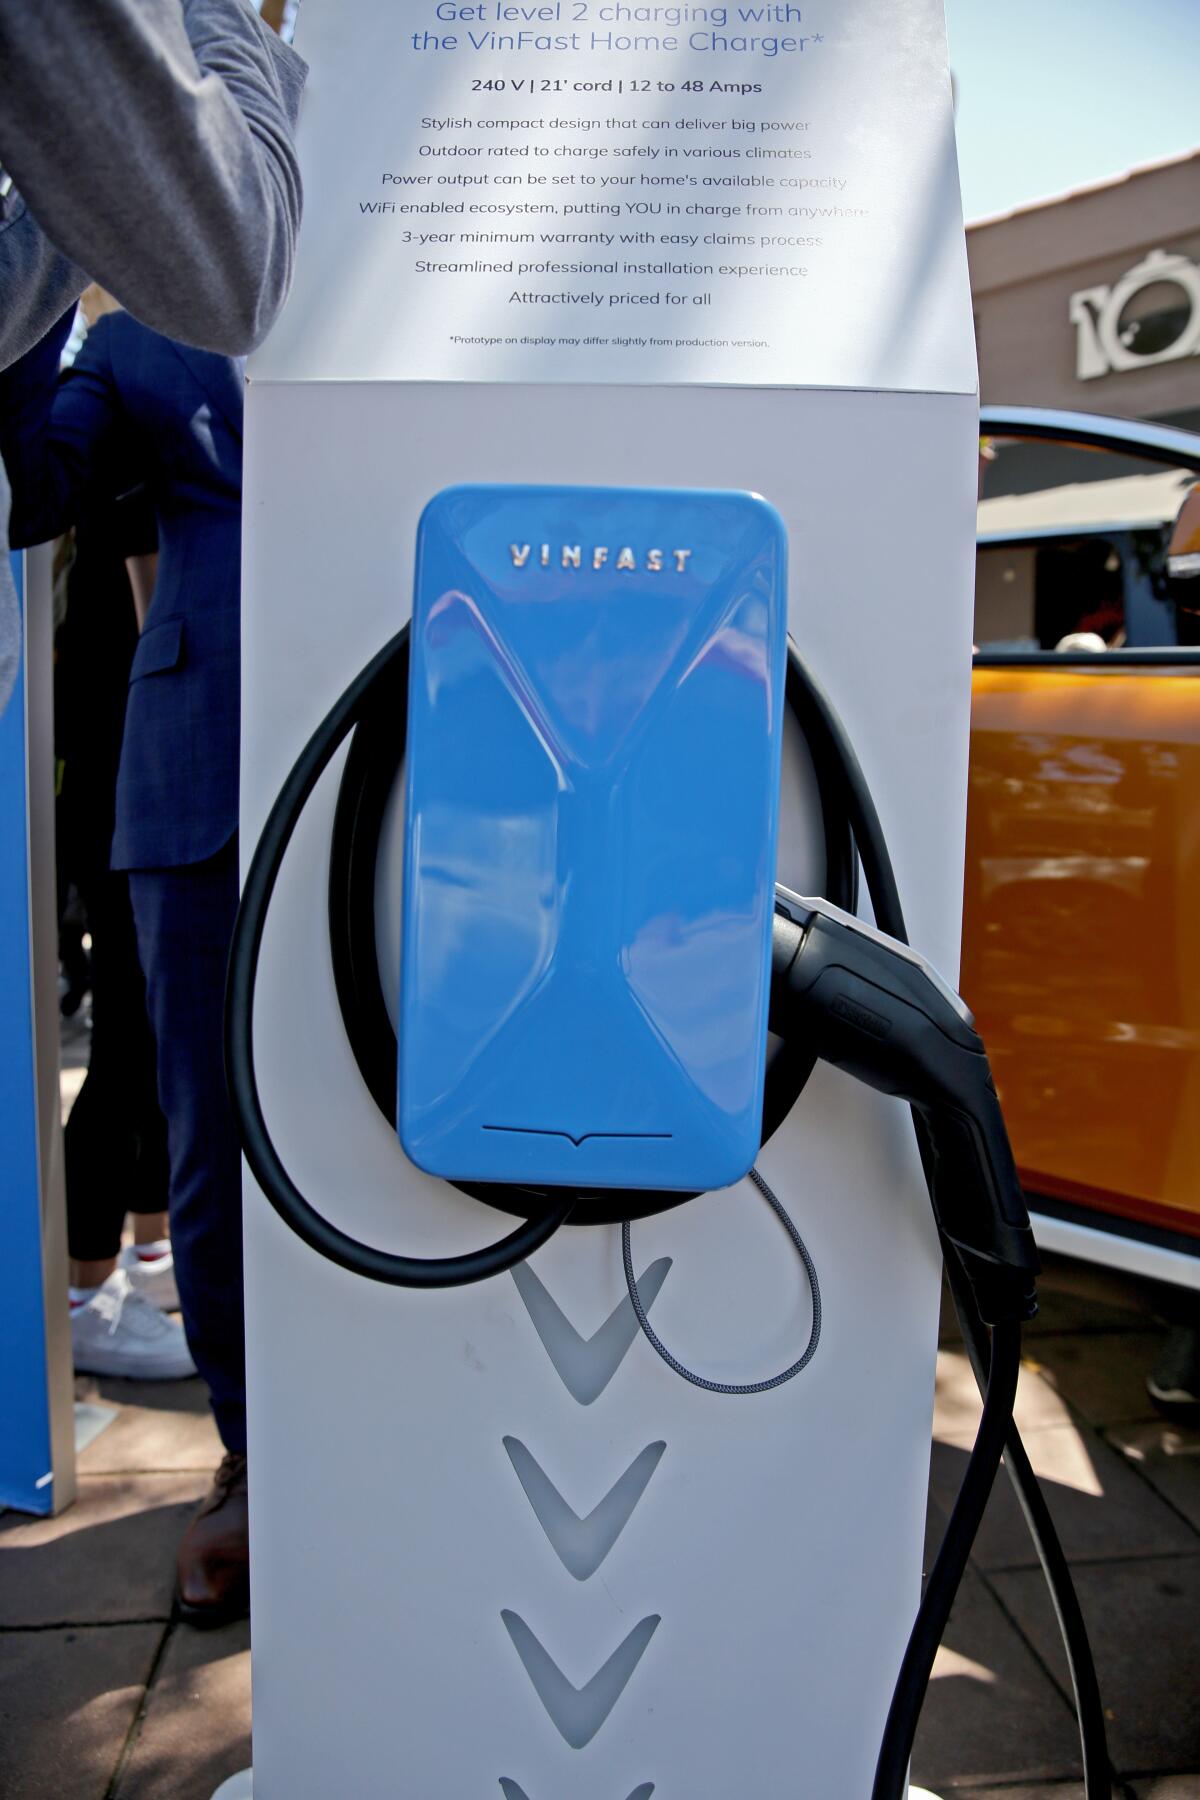 The 240V charger for the VinFast VF8 electric SUV.